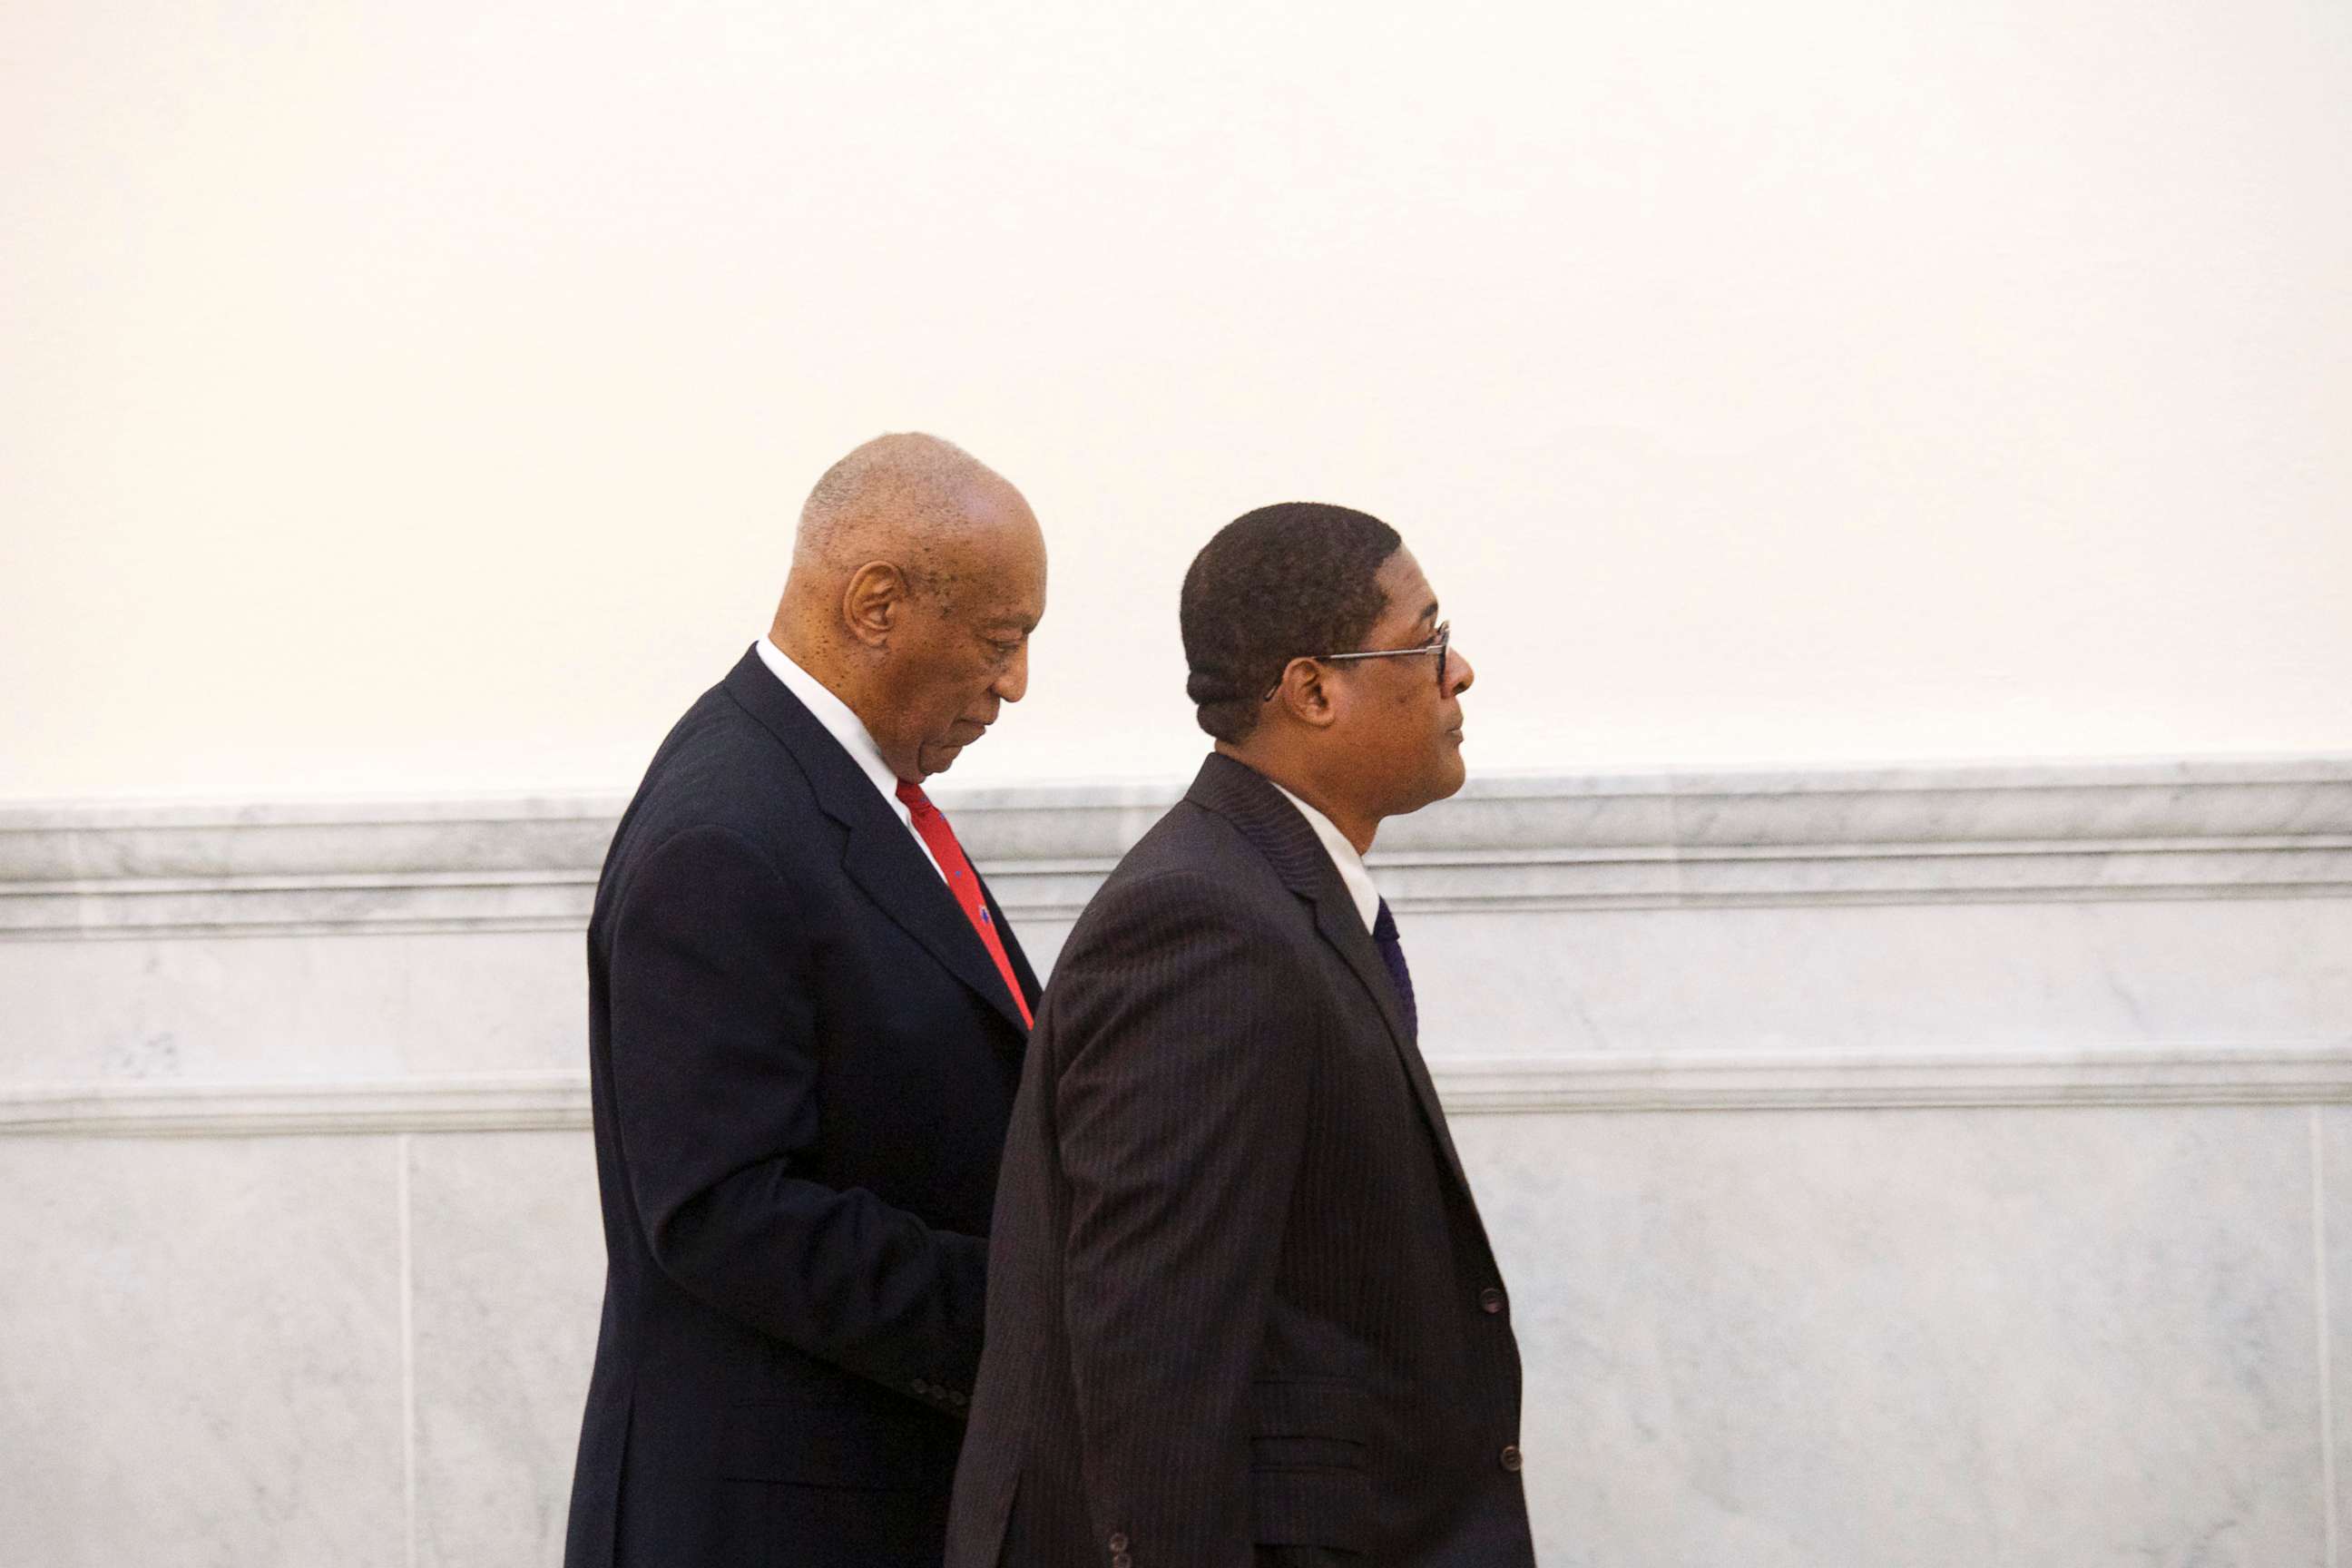 PHOTO: Bill Cosby walks through the Montgomery County Courthouse with his publicist, Andrew Wyatt, after being found guilty on all counts in his sexual assault retrial, April 26, 2018, in Norristown, Pa.